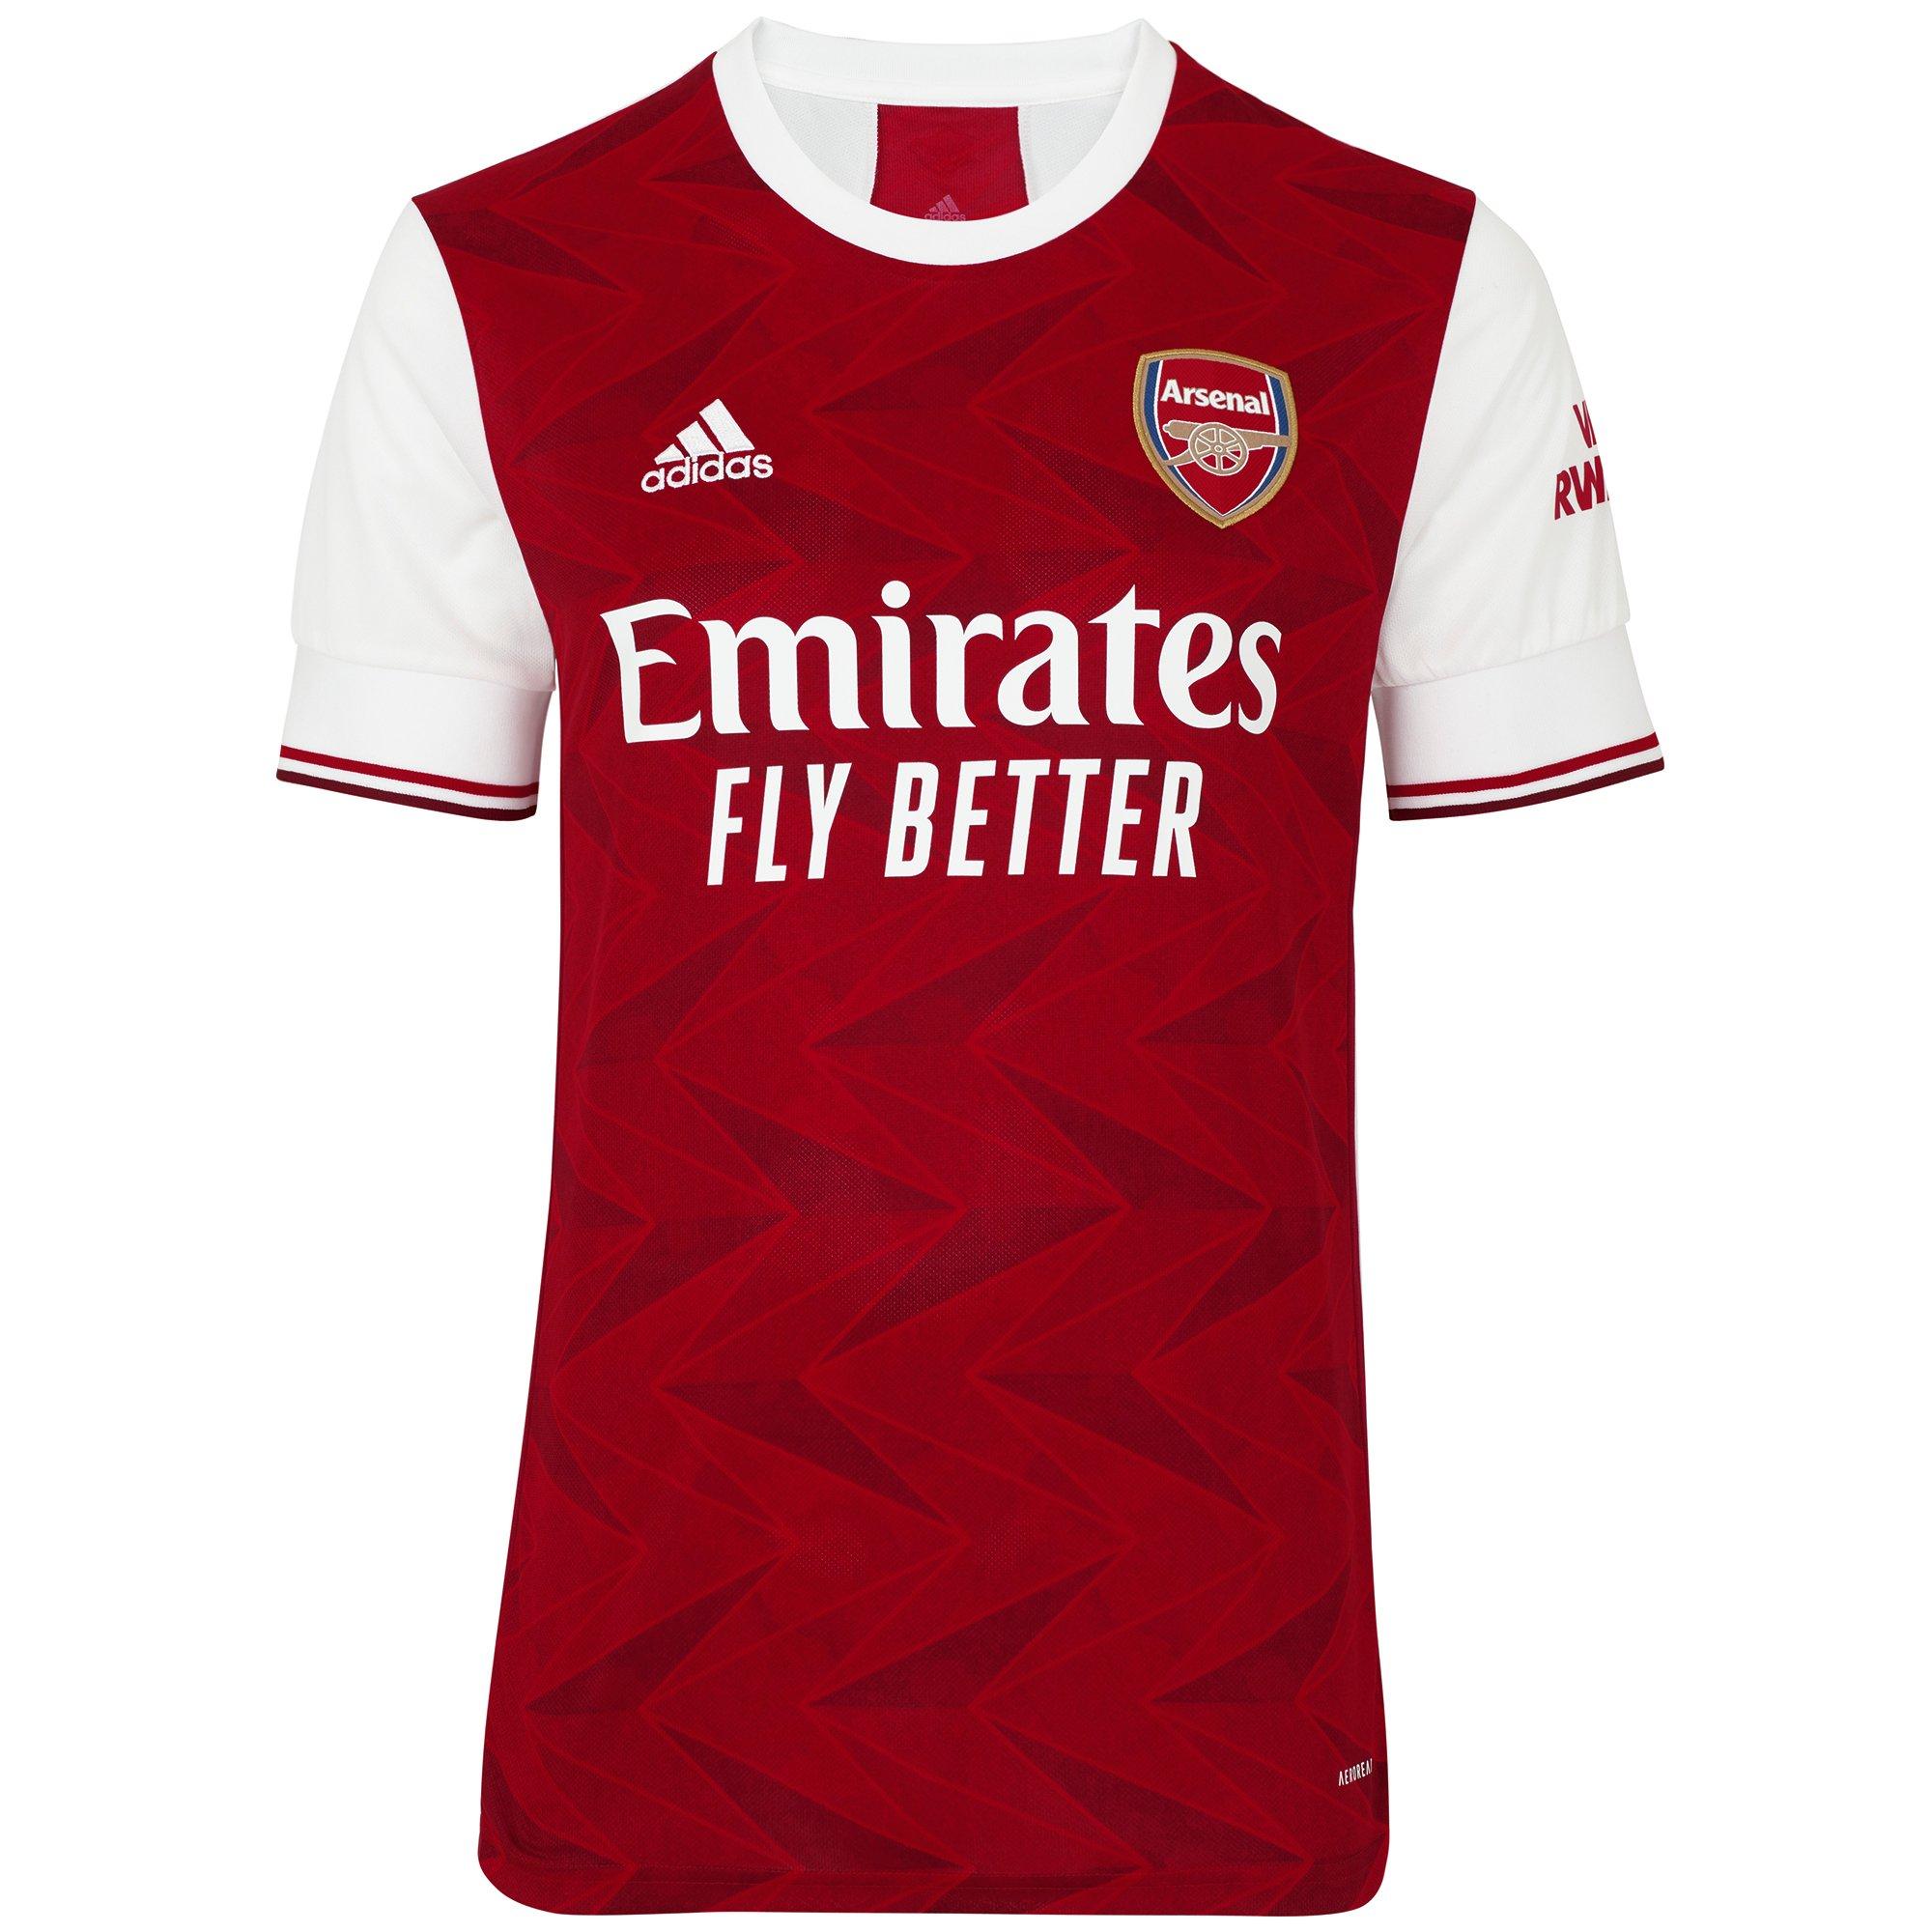 The Arsenal 20/21 Kits | Official 